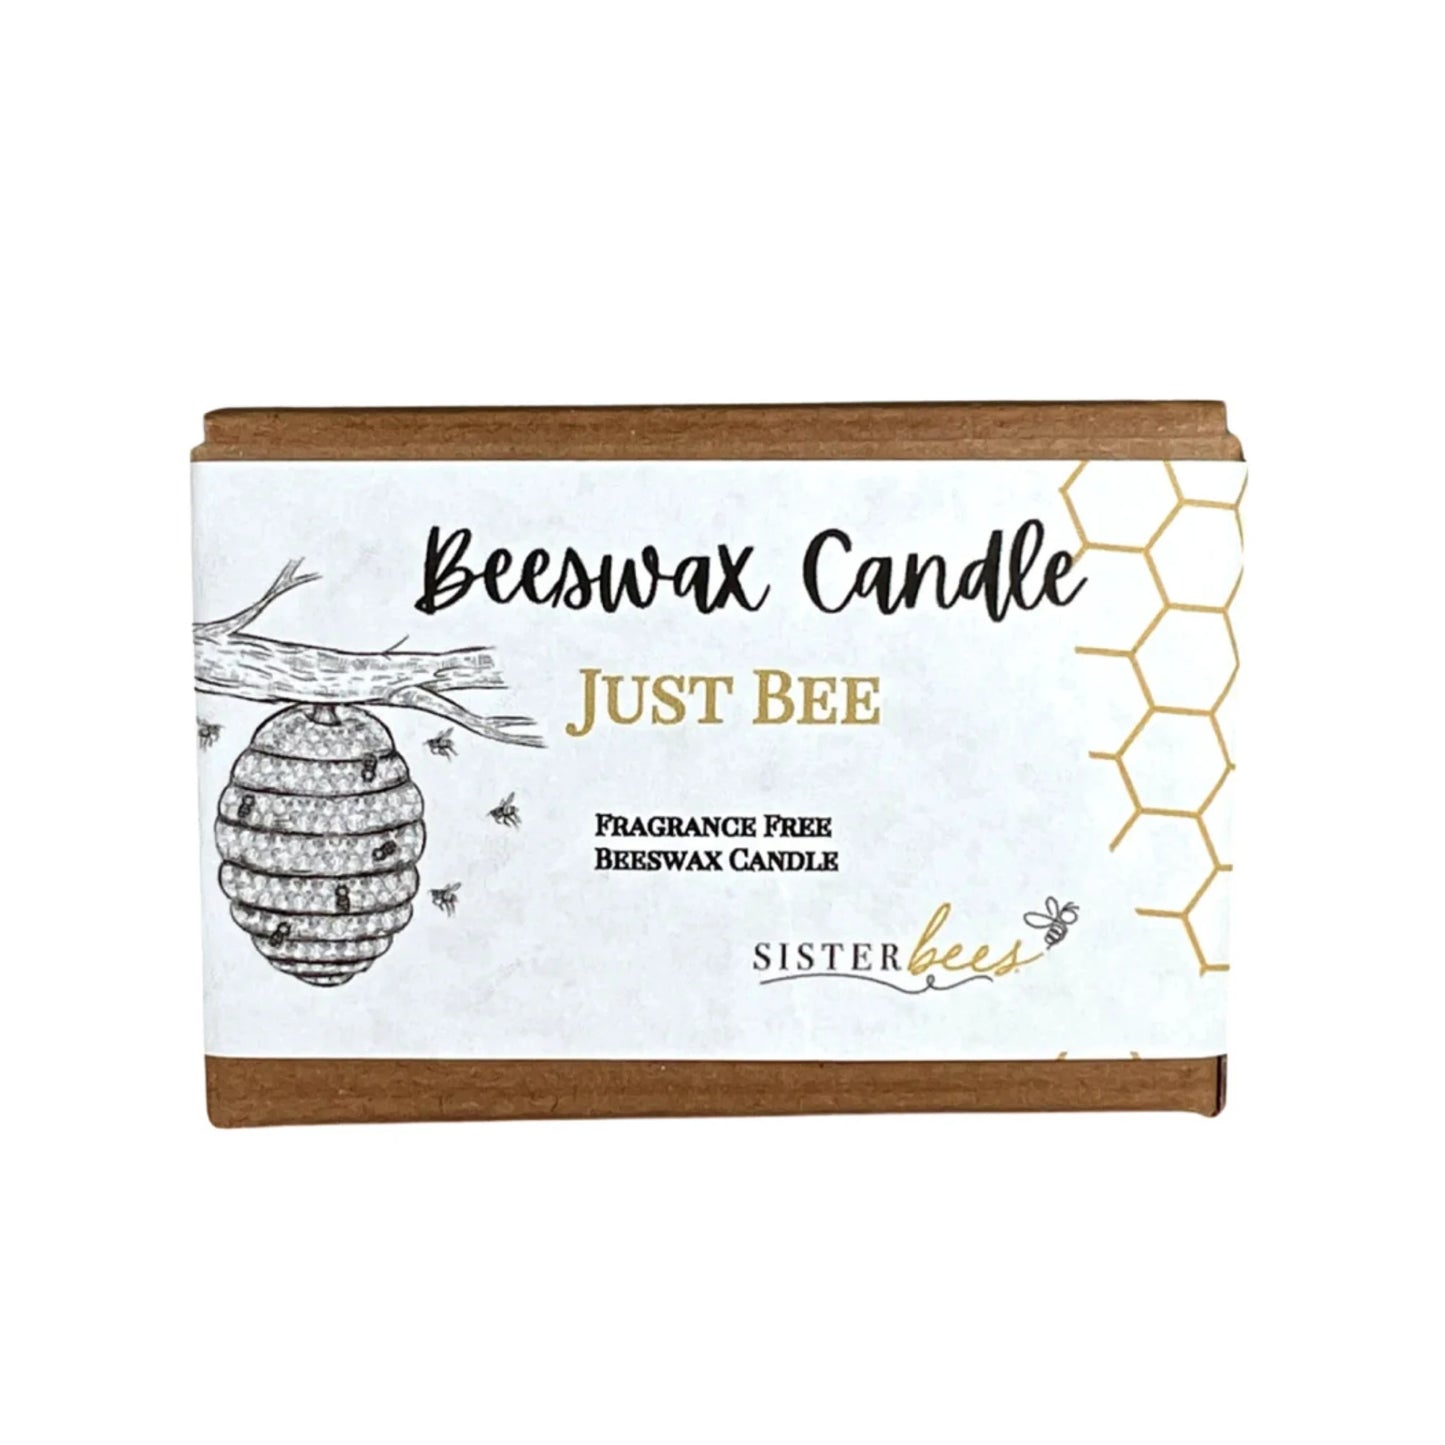 Natural Beeswax & Coconut Oil Candle in a Reusable Tin